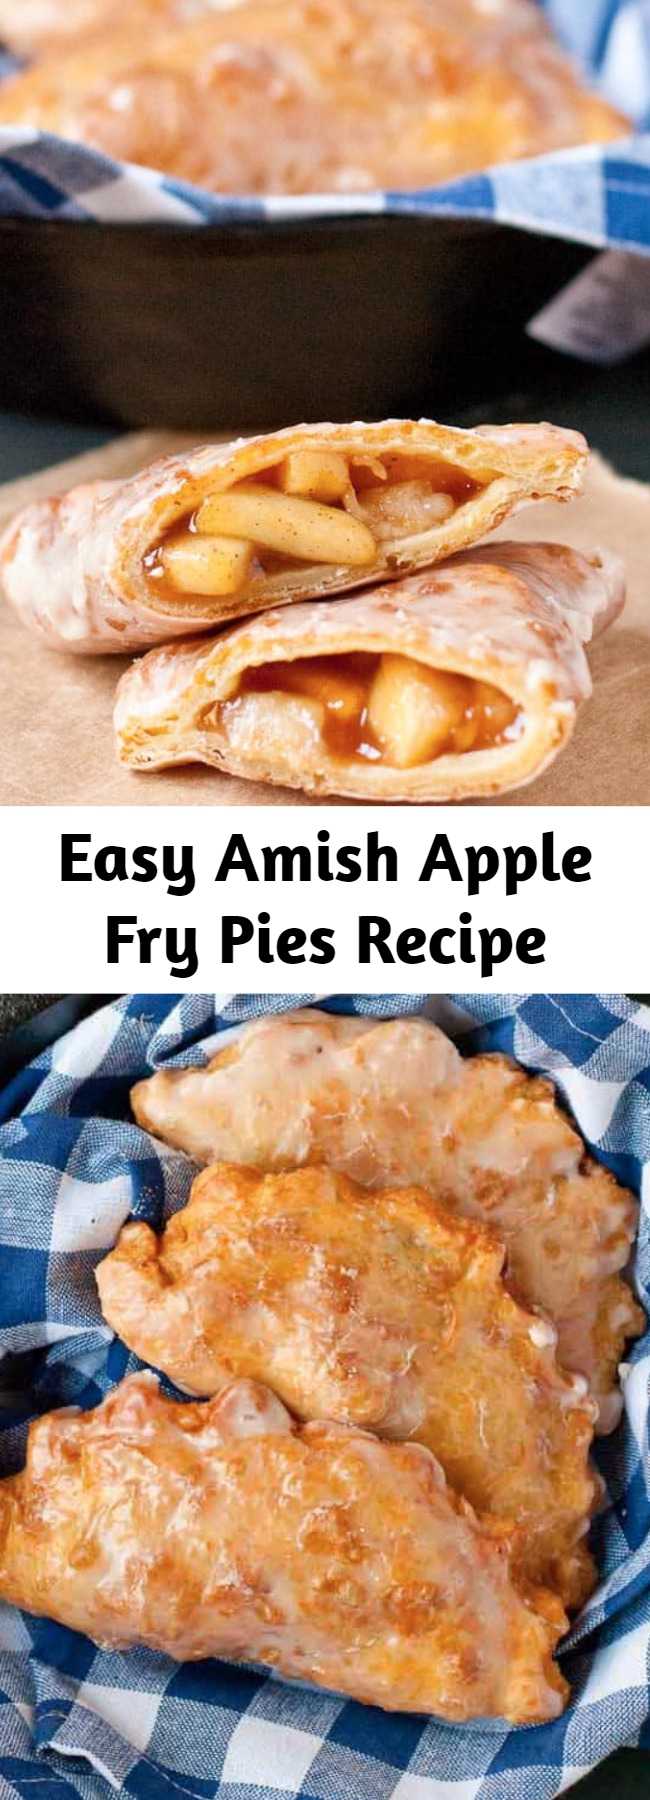 Easy Amish Apple Fry Pies Recipe - These Amish Apple Fry Pies are irresistible. The filling is simple with just a hint of spice. The crust is tender and flaky and just a little crunchy. And the glaze? It dries into a crackly sweet coating that seals in all the goodness.